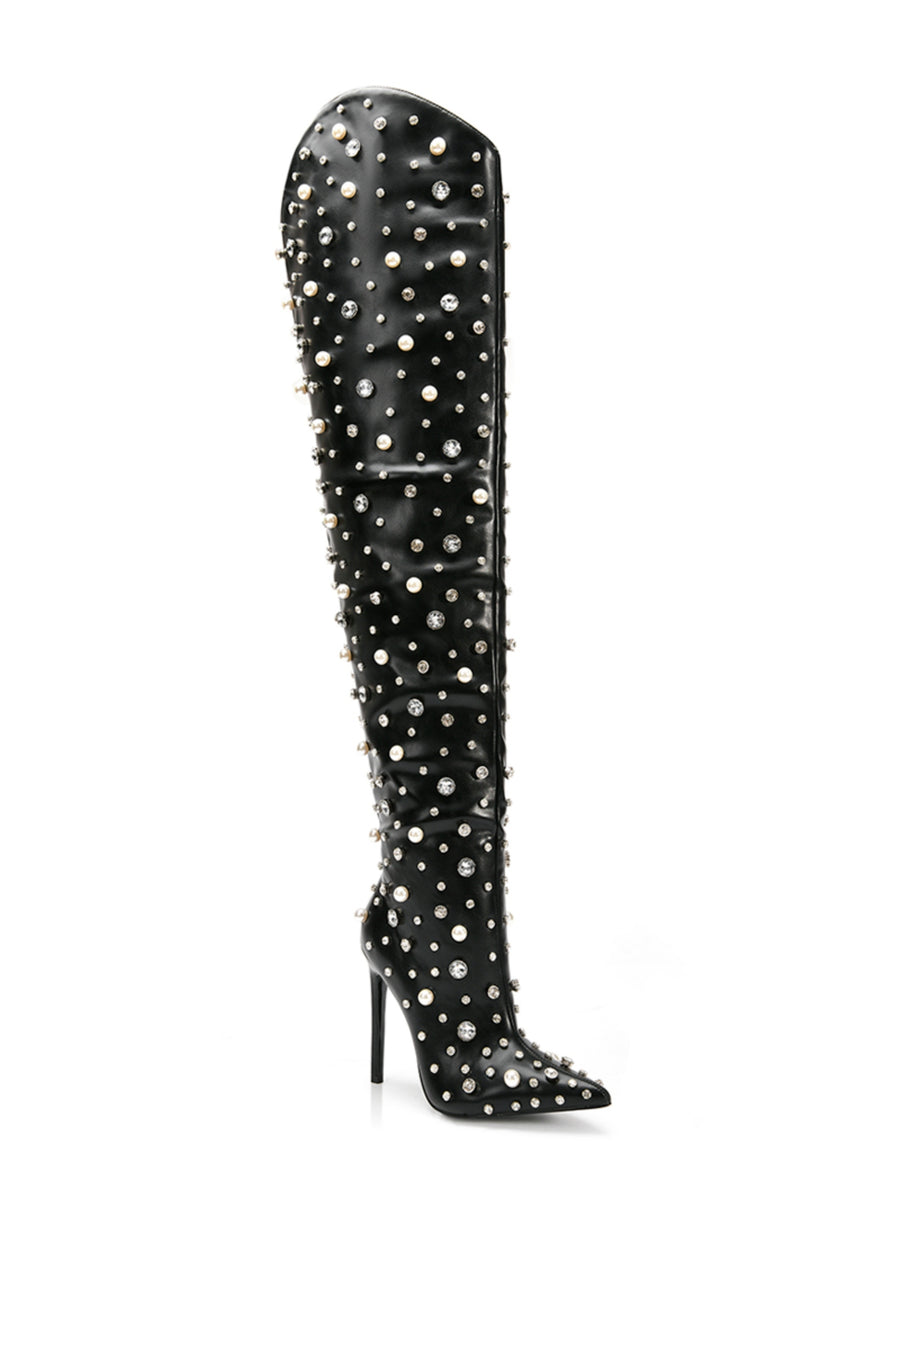 angled view of black faux leather thigh high pointed toe stiletto boots embellished with scattered pearls and crystals